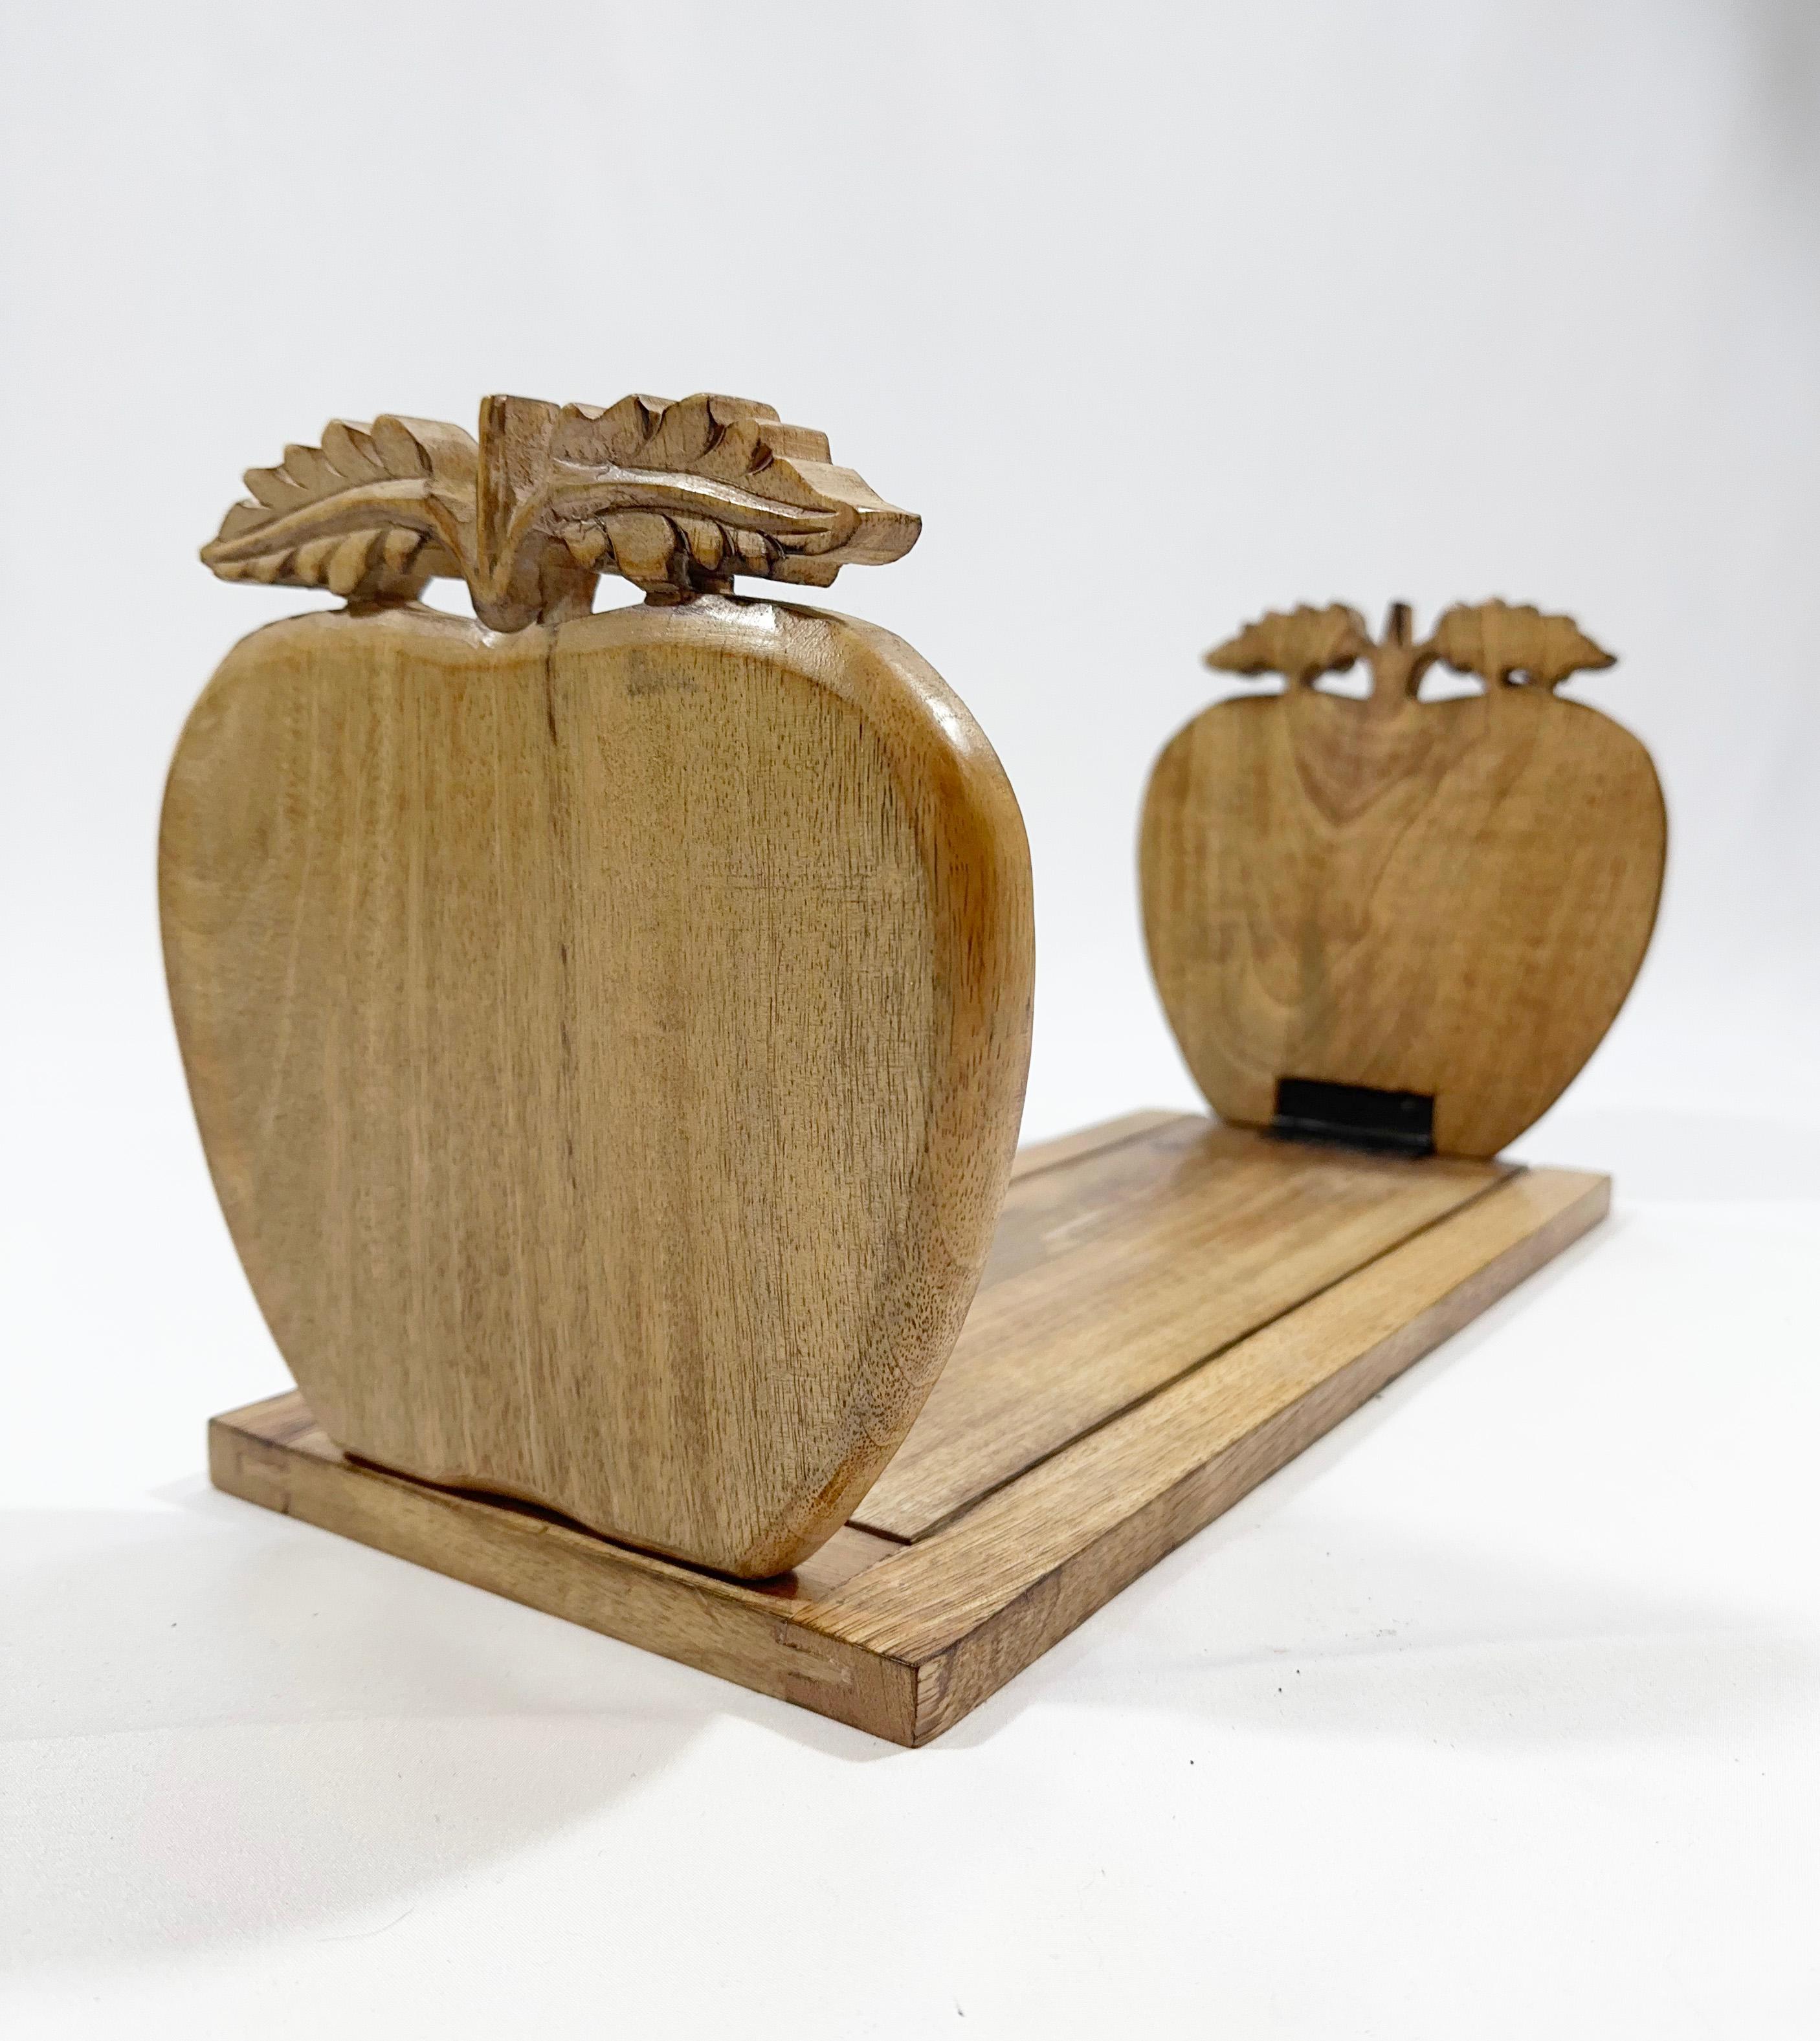 This mid-century book slide, originating from England, is a quaint amalgamation of utility and caprice. Handcrafted from English oak, known for its endurance and patina that deepens with age, it features whimsically carved apple-shaped book ends, a